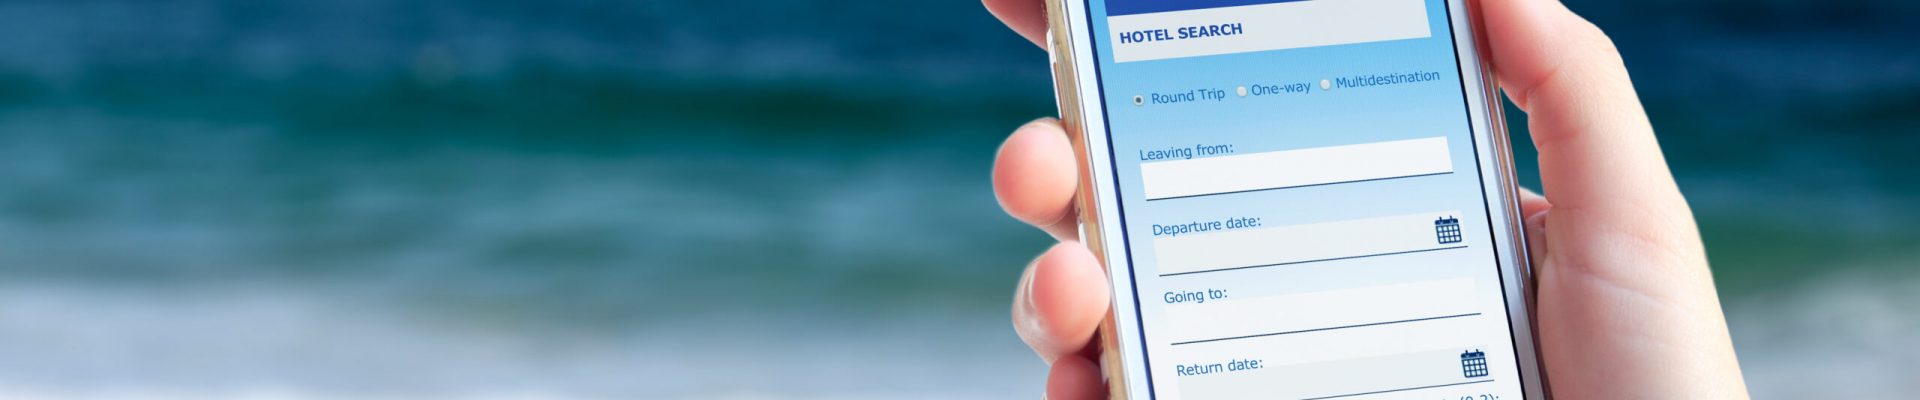 mobile hotel booking engine